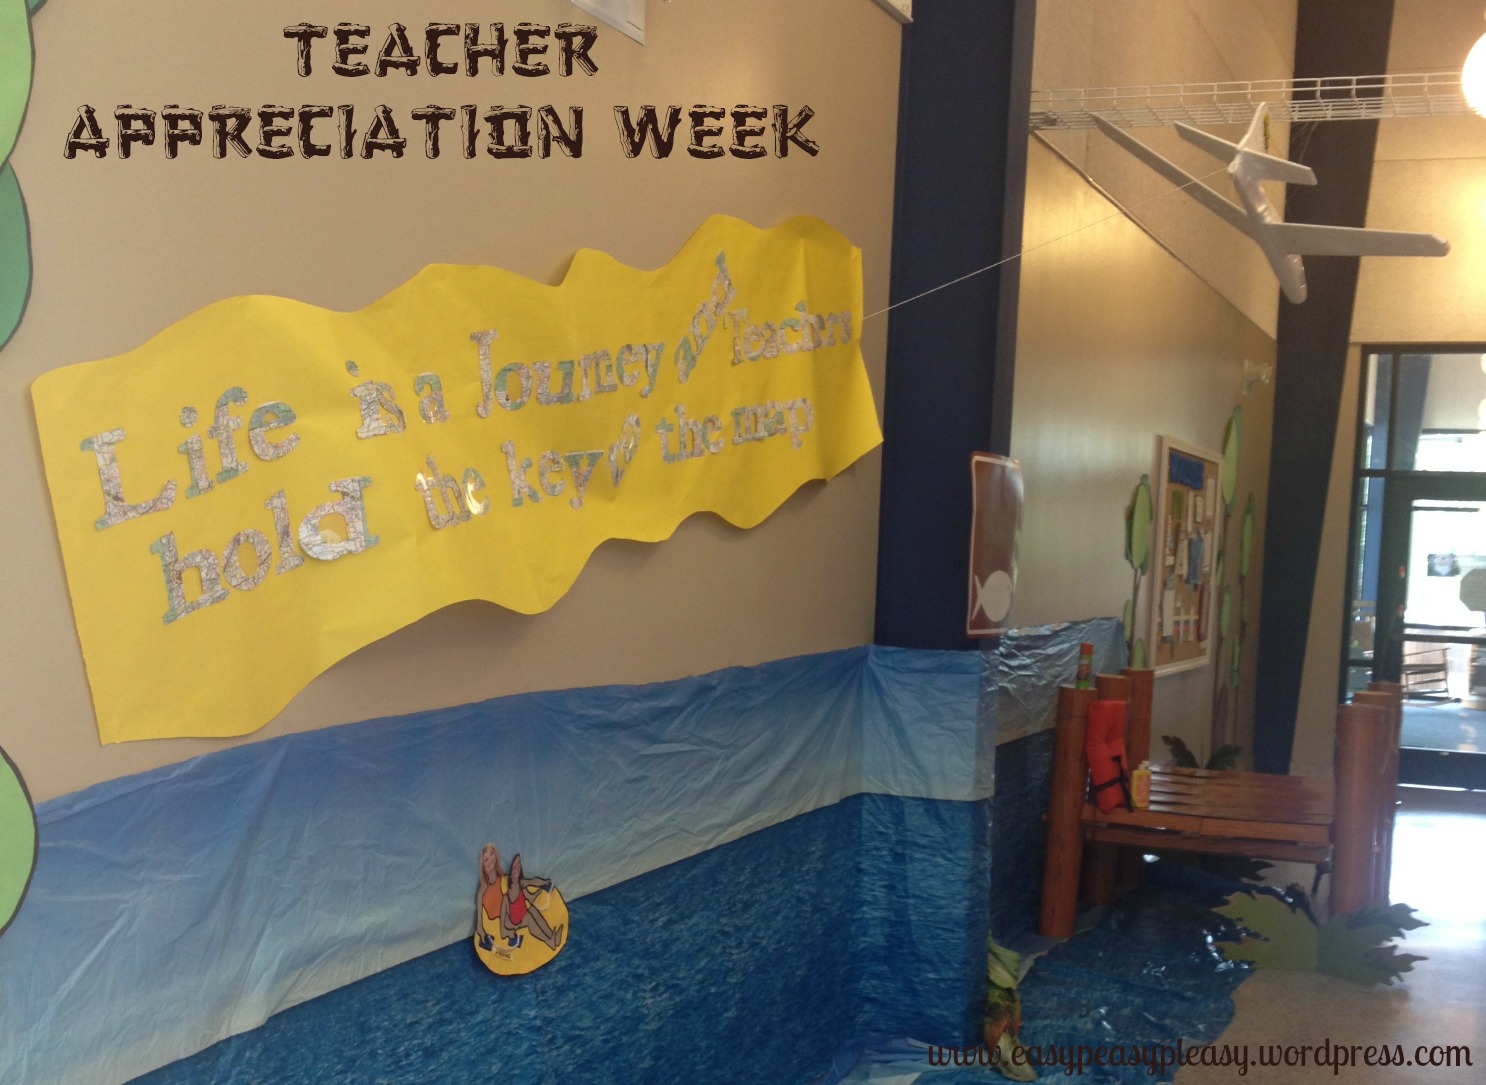 Teacher Appreciation Week Camping Theme Life is a Journey and Teachers hold the key to the map